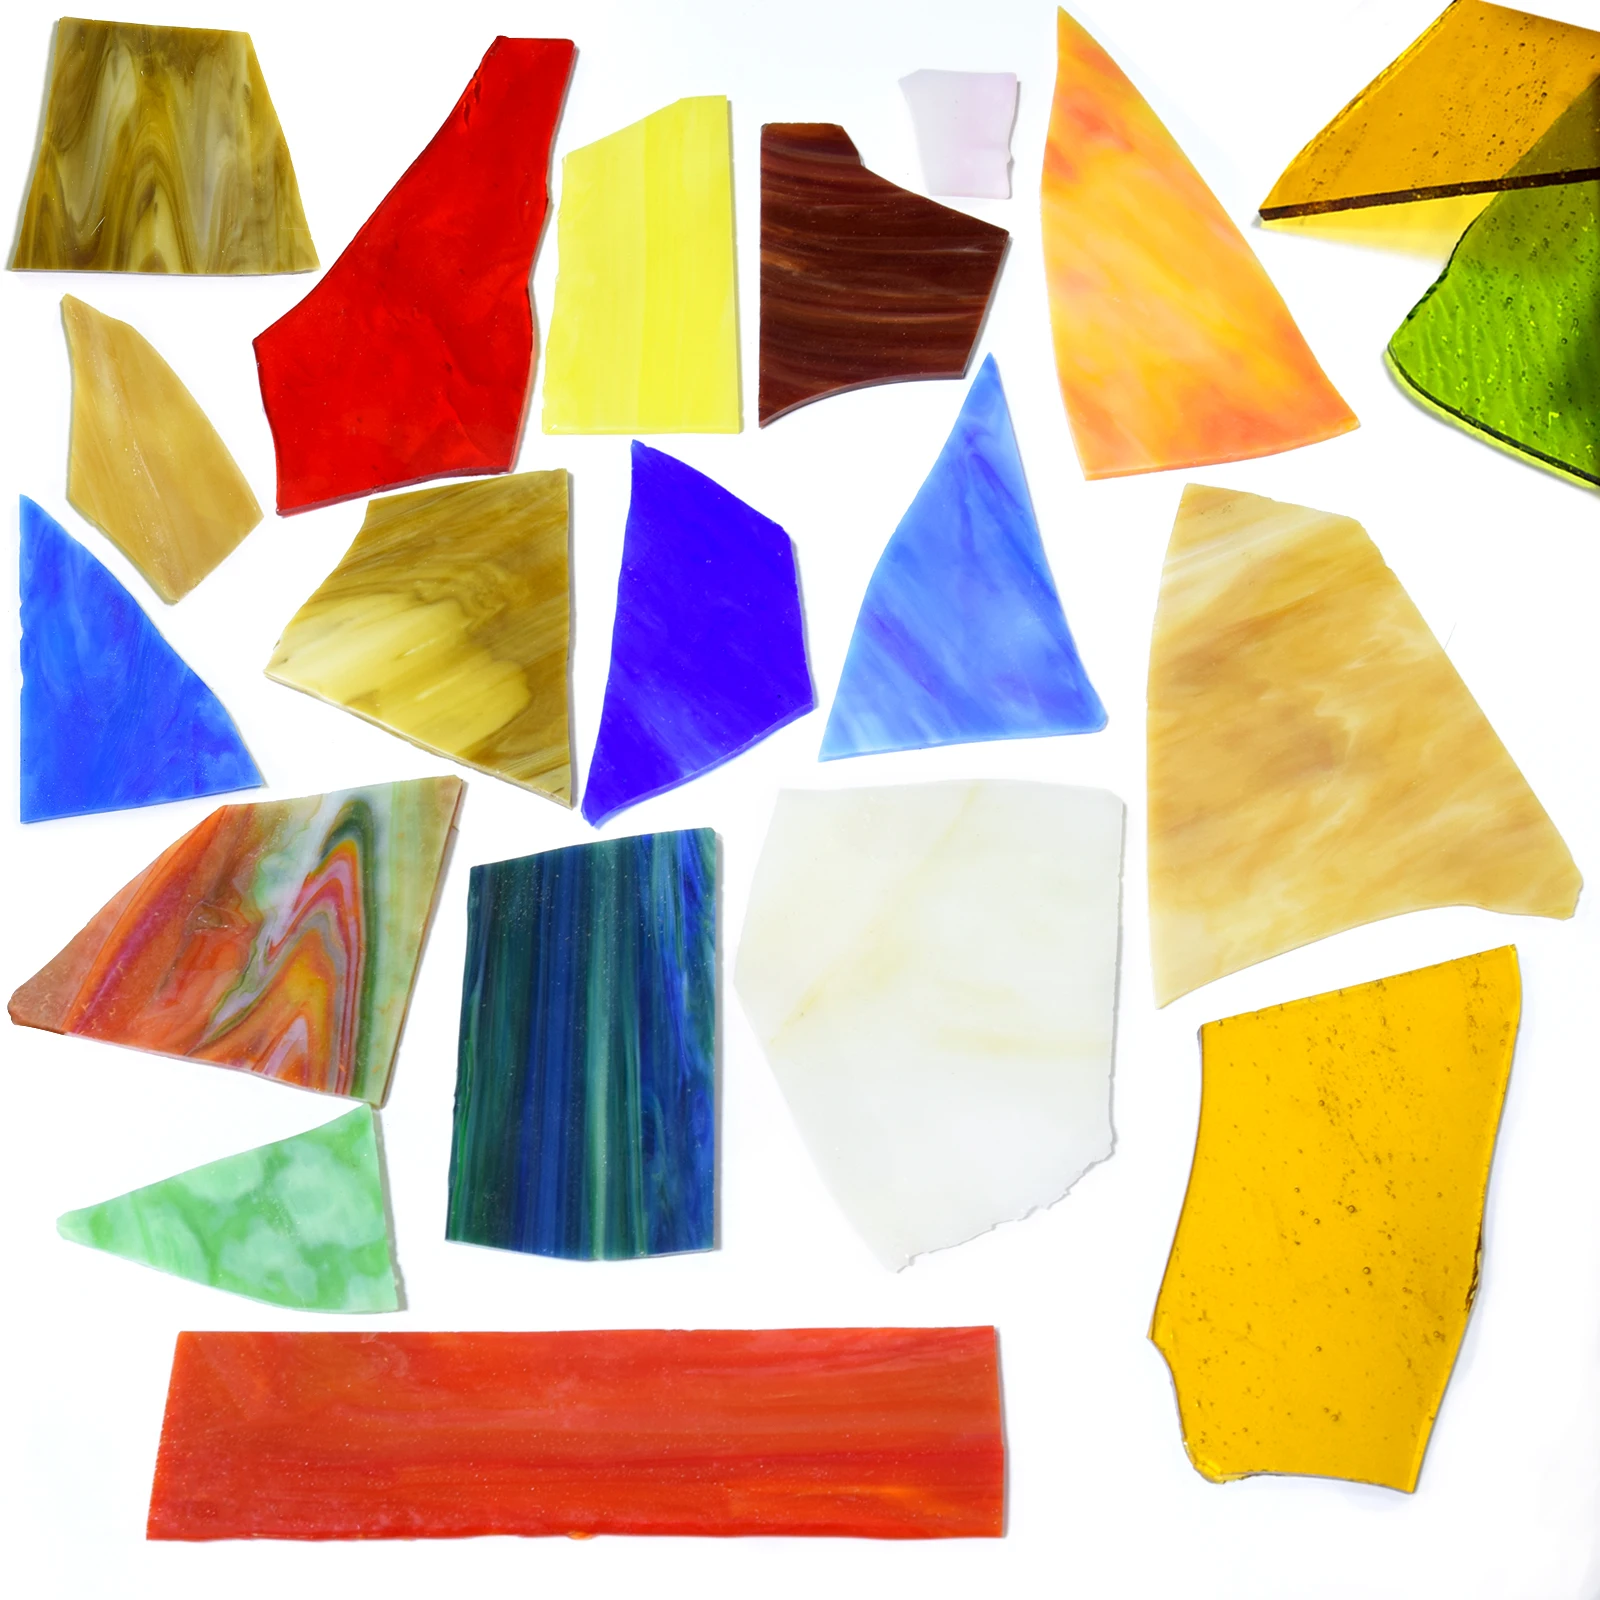 

500g irregular random mixed stained glass fragments DIY mosaic tiles for crafts, stained glass pieces for mosaic items